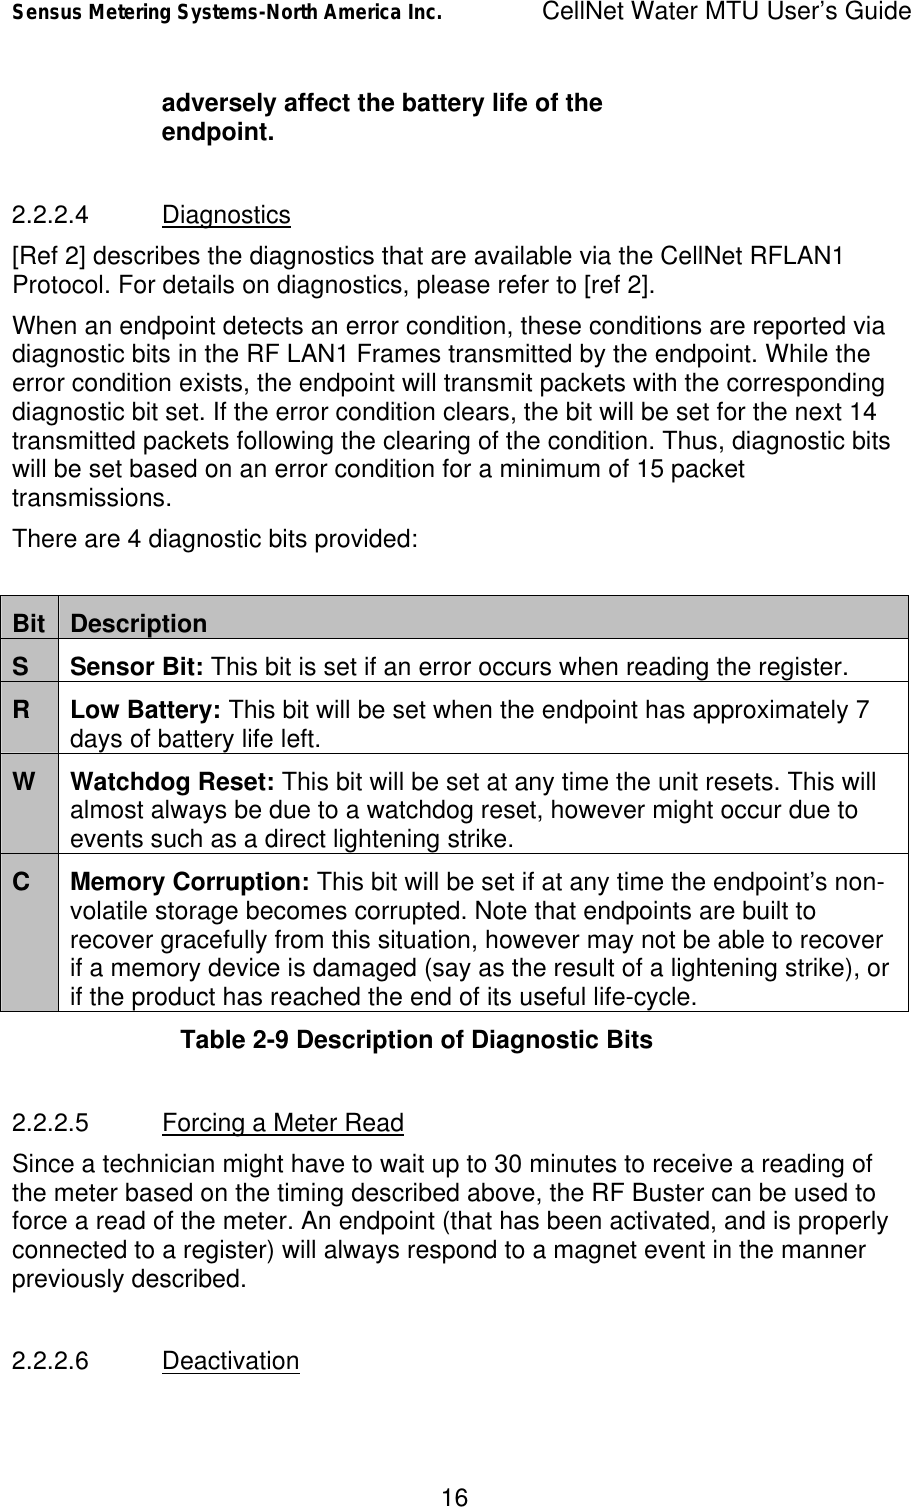 Sensus Metering Systems-North America Inc.    CellNet Water MTU User’s Guide 16 adversely affect the battery life of the endpoint.  2.2.2.4 Diagnostics [Ref 2] describes the diagnostics that are available via the CellNet RFLAN1 Protocol. For details on diagnostics, please refer to [ref 2]. When an endpoint detects an error condition, these conditions are reported via diagnostic bits in the RF LAN1 Frames transmitted by the endpoint. While the error condition exists, the endpoint will transmit packets with the corresponding diagnostic bit set. If the error condition clears, the bit will be set for the next 14 transmitted packets following the clearing of the condition. Thus, diagnostic bits will be set based on an error condition for a minimum of 15 packet transmissions. There are 4 diagnostic bits provided:  Bit Description S Sensor Bit: This bit is set if an error occurs when reading the register. R Low Battery: This bit will be set when the endpoint has approximately 7 days of battery life left. W Watchdog Reset: This bit will be set at any time the unit resets. This will almost always be due to a watchdog reset, however might occur due to events such as a direct lightening strike. C Memory Corruption: This bit will be set if at any time the endpoint’s non-volatile storage becomes corrupted. Note that endpoints are built to recover gracefully from this situation, however may not be able to recover if a memory device is damaged (say as the result of a lightening strike), or if the product has reached the end of its useful life-cycle. Table 2-9 Description of Diagnostic Bits  2.2.2.5 Forcing a Meter Read Since a technician might have to wait up to 30 minutes to receive a reading of the meter based on the timing described above, the RF Buster can be used to force a read of the meter. An endpoint (that has been activated, and is properly connected to a register) will always respond to a magnet event in the manner previously described.  2.2.2.6 Deactivation 